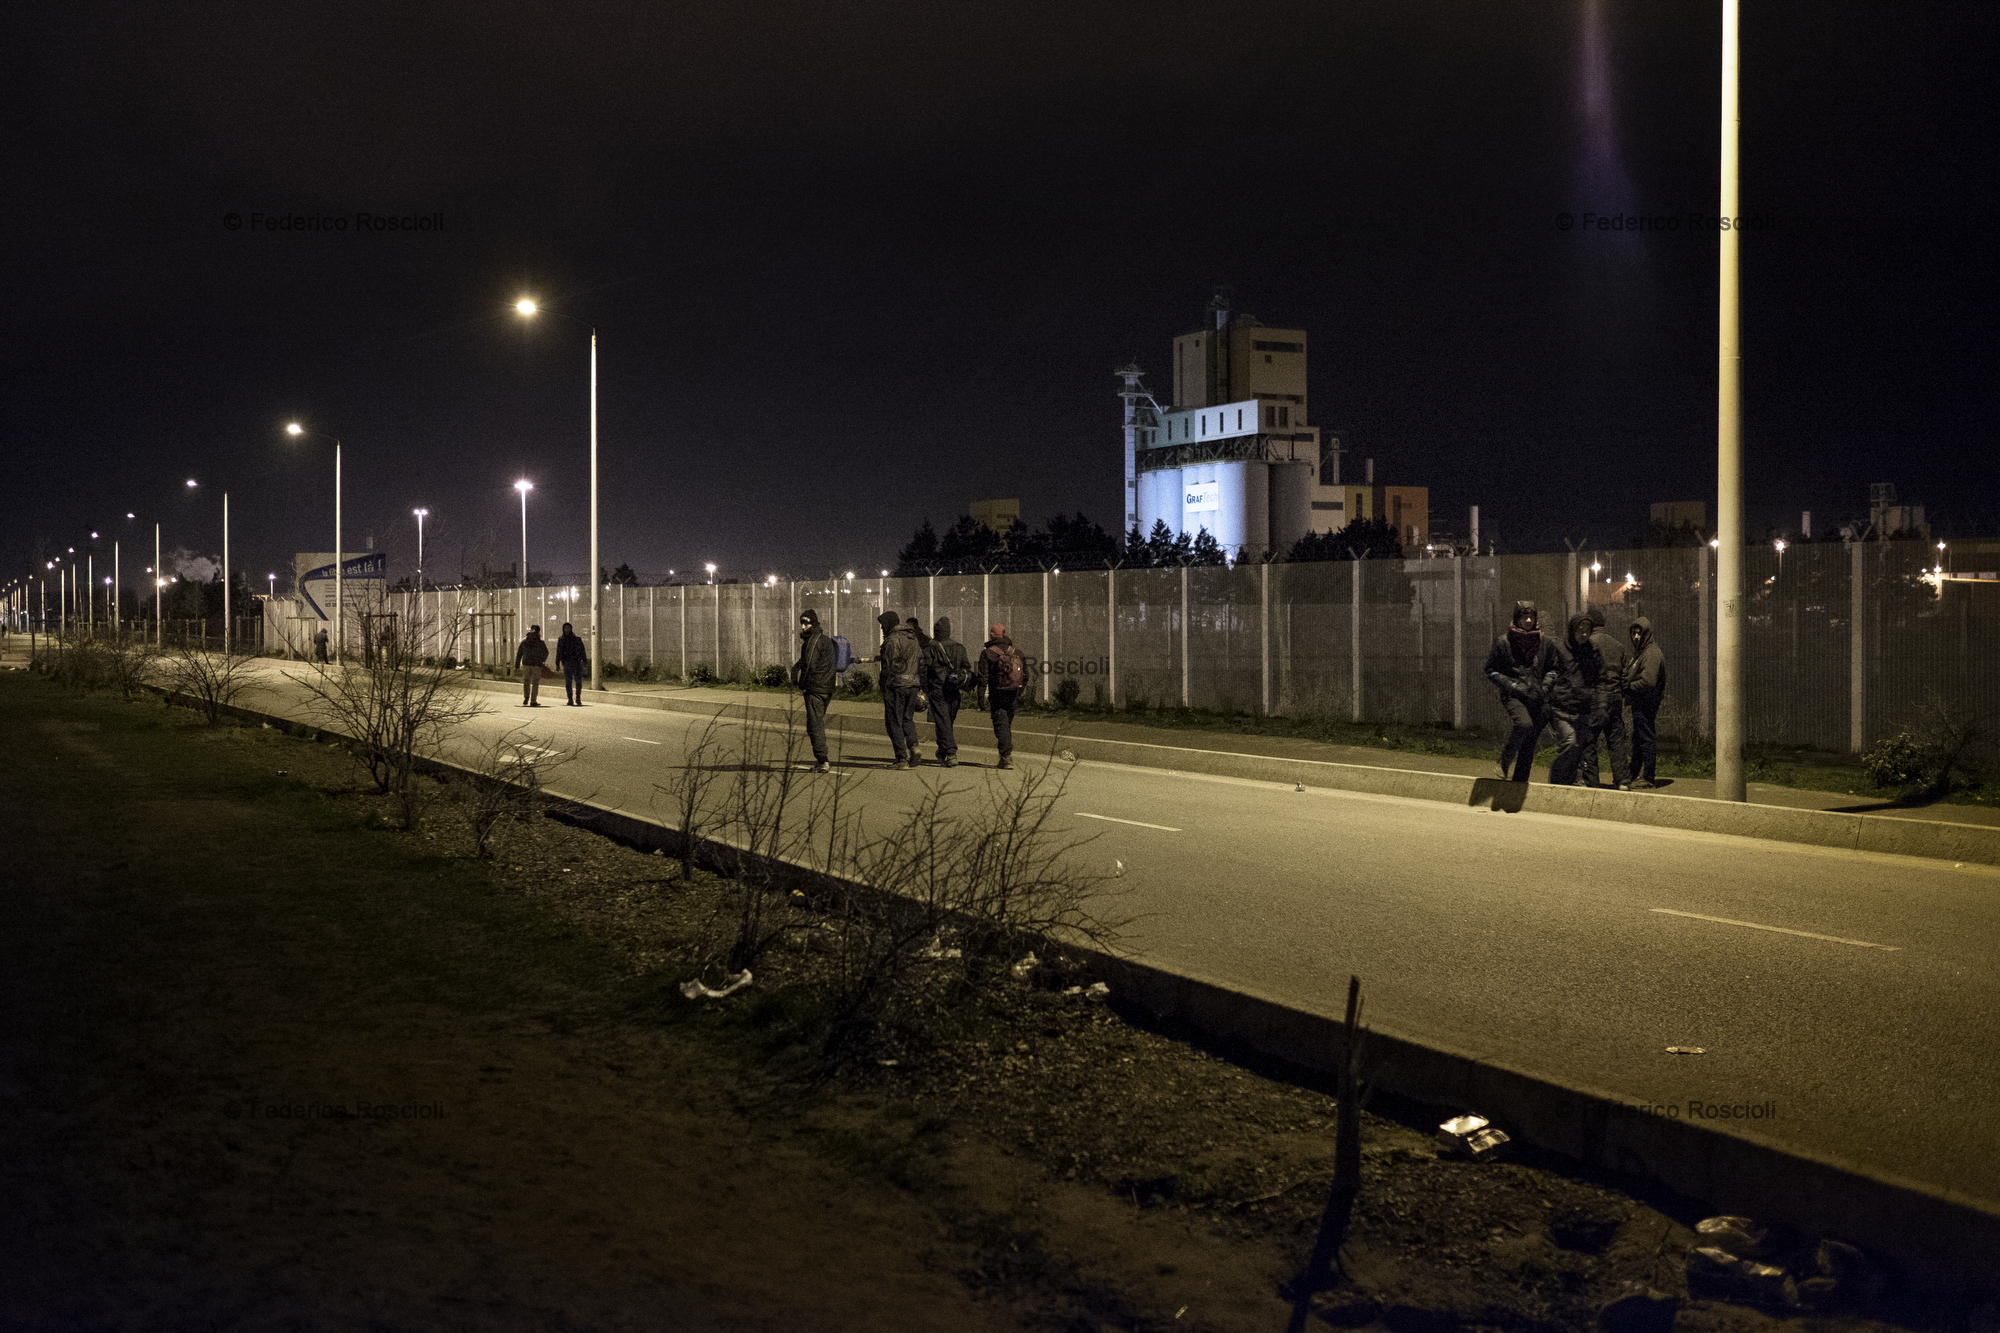 Calais, France. February 28, 2016. During evenings and nights migrants walk from the camp to the train station or the truck parking in order to 'try it', meaning try to reach the UK.